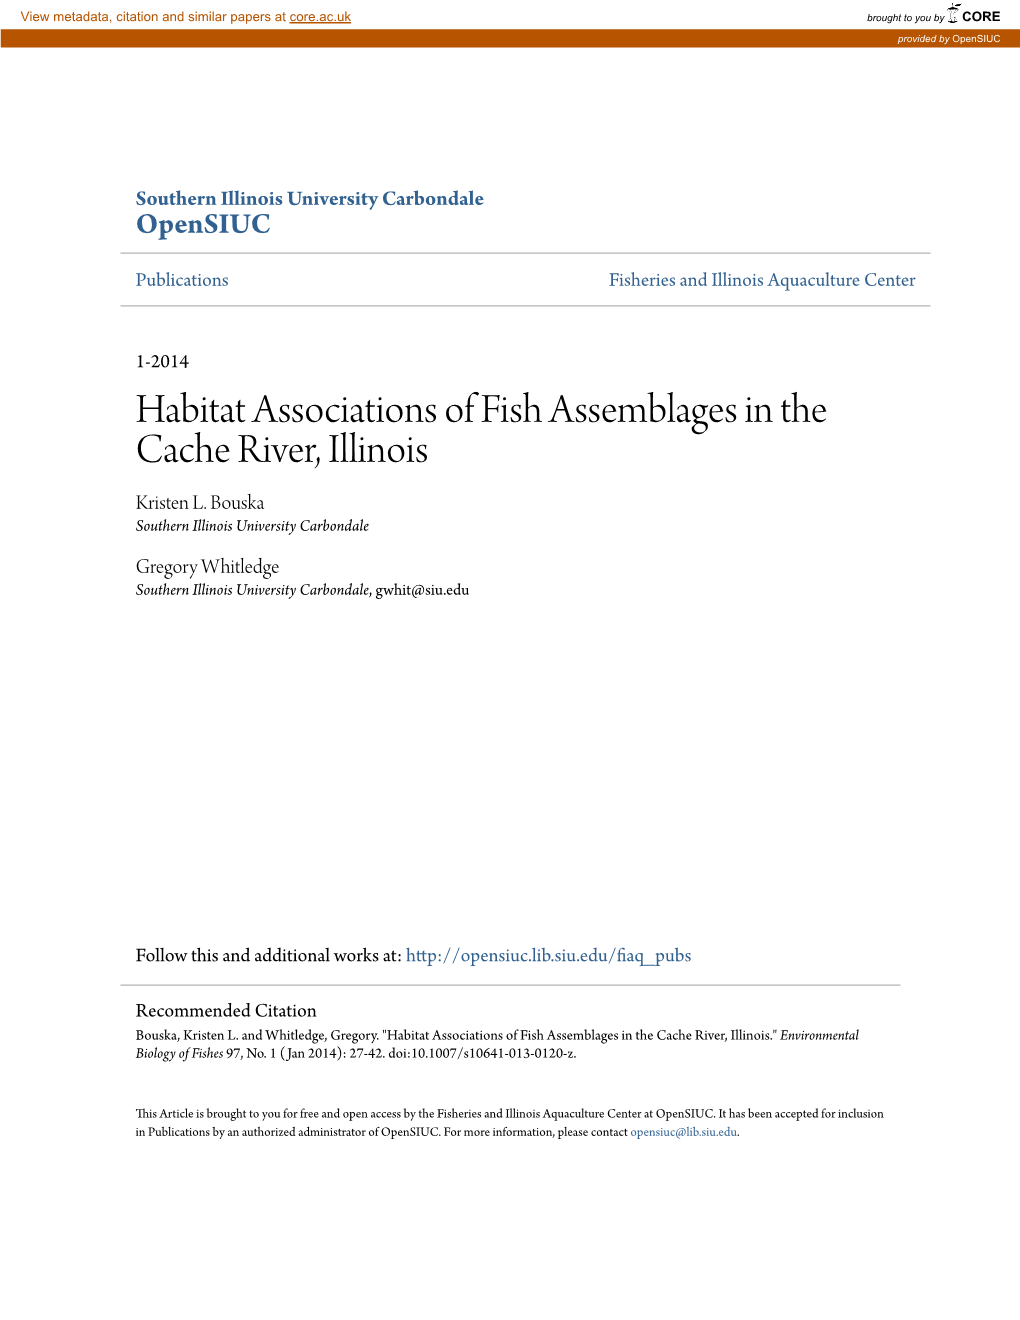 Habitat Associations of Fish Assemblages in the Cache River, Illinois Kristen L